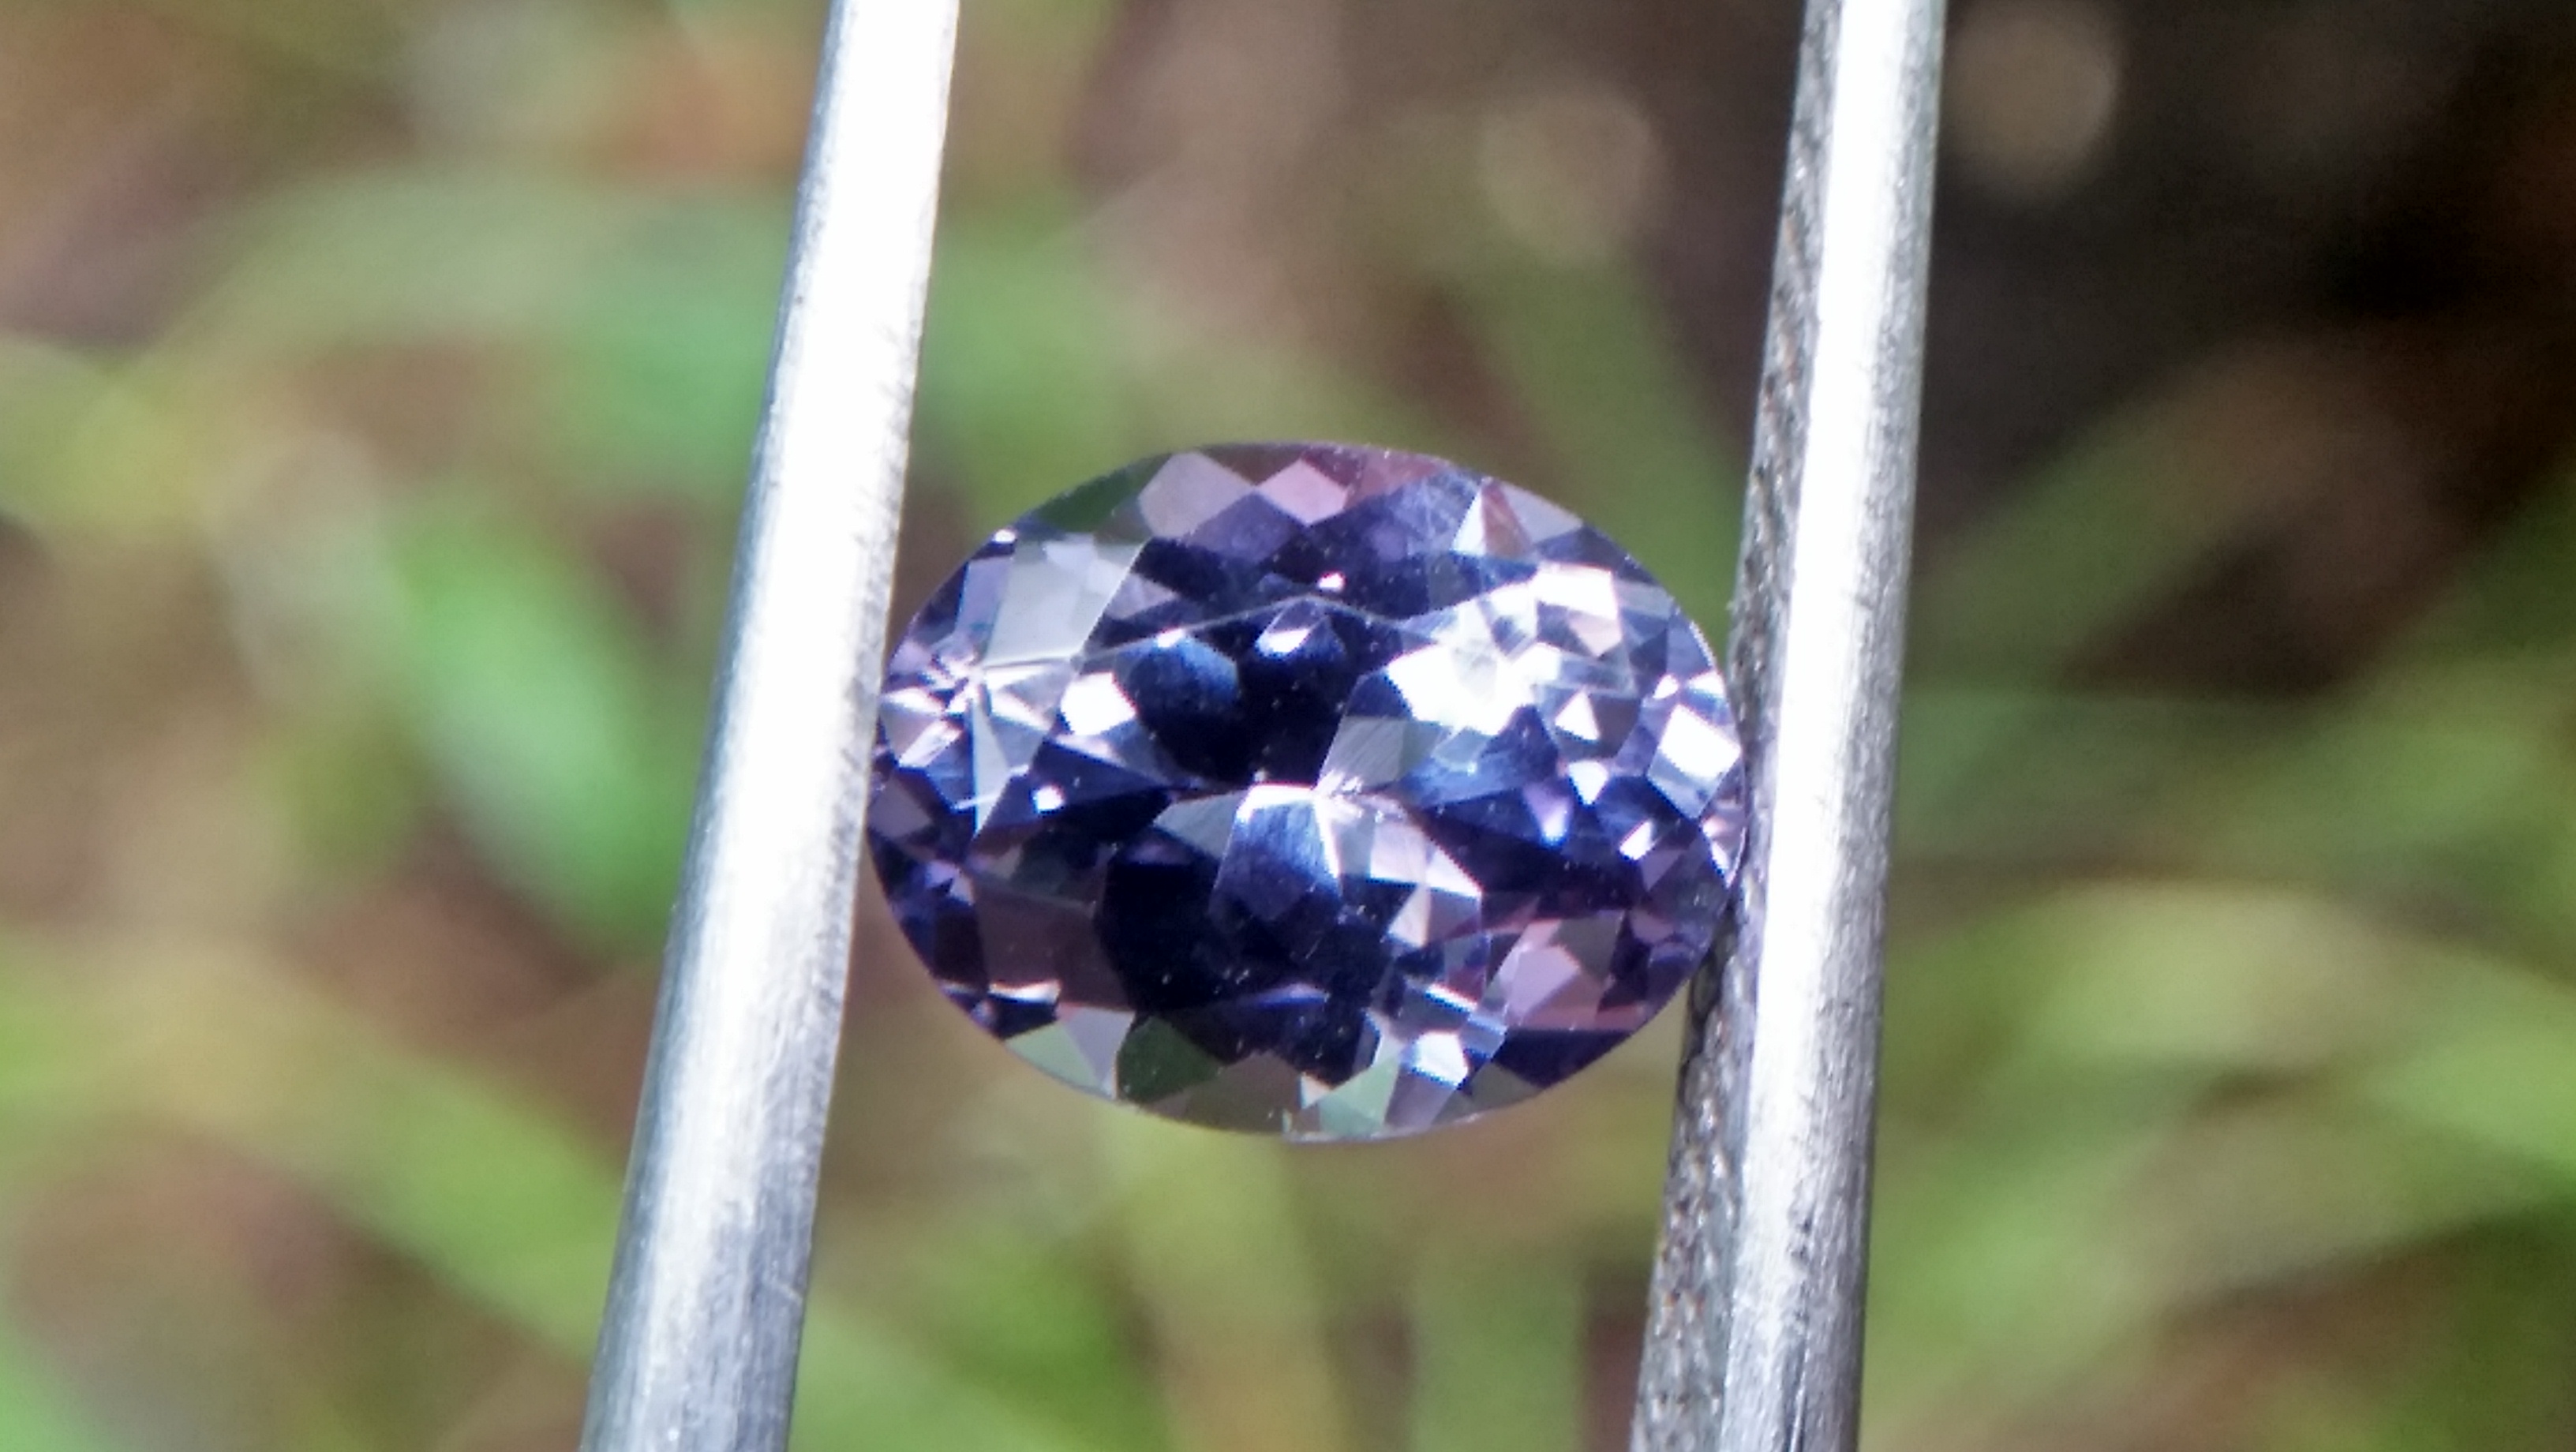 NATURAL Bluish Violet SPINEL Shape : Ovel Clarity : SI Treatment : Natural/Unheated Dimension : 7.5mm x 5.9mm x 4.05mm Weight : 1.29Cts Colour : Bluish Violet